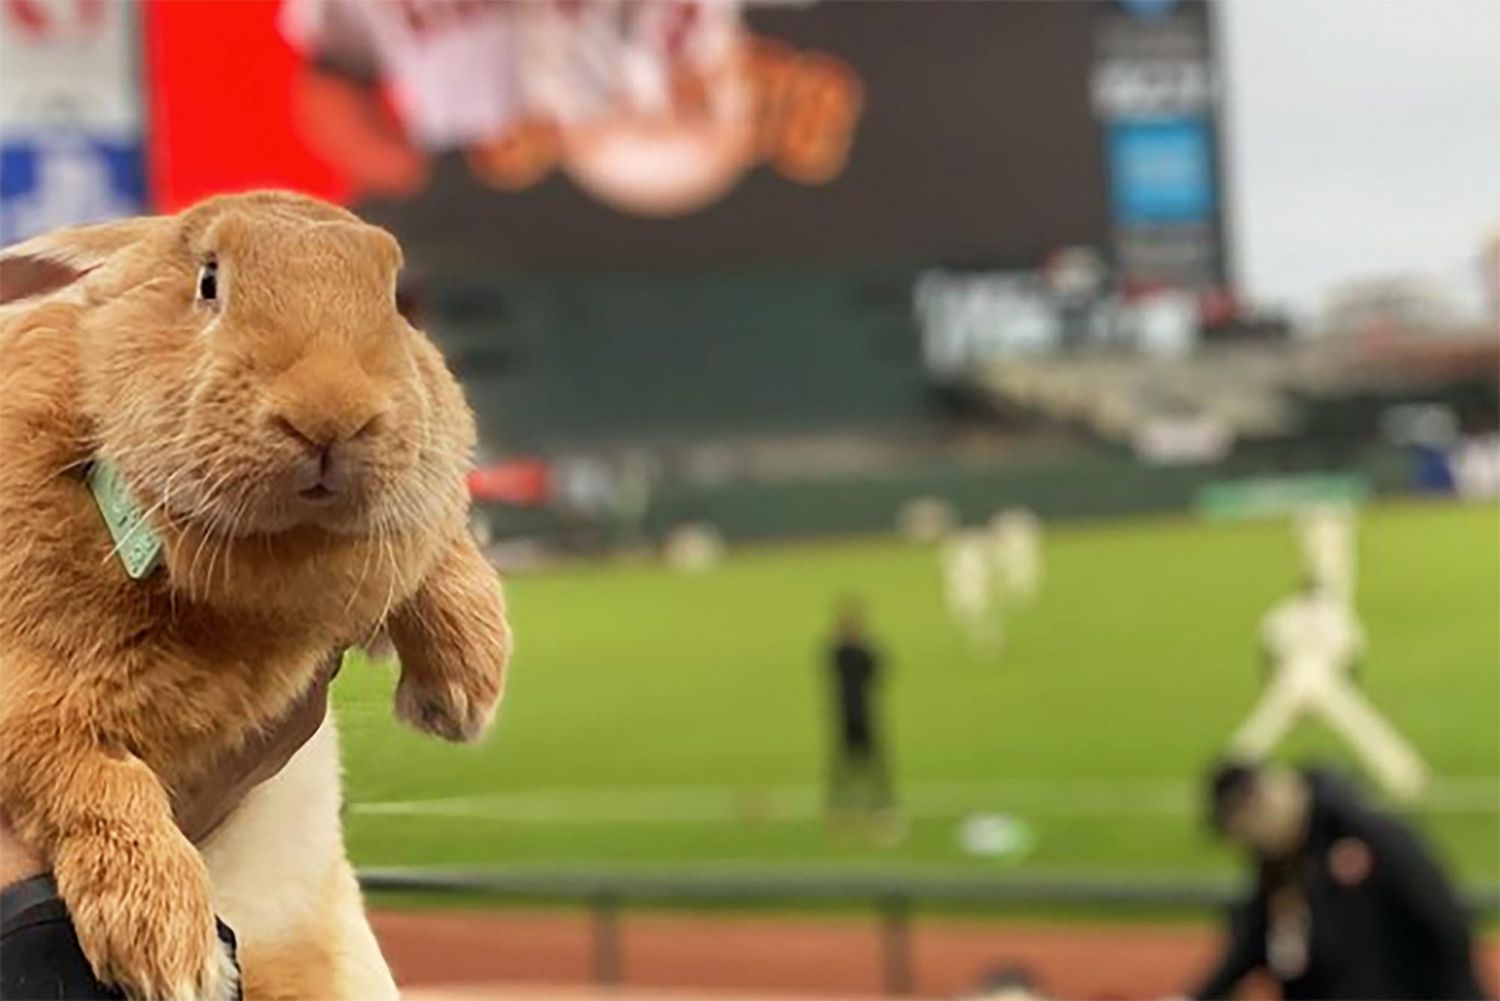 Alex, the giant bunny at a Giants game